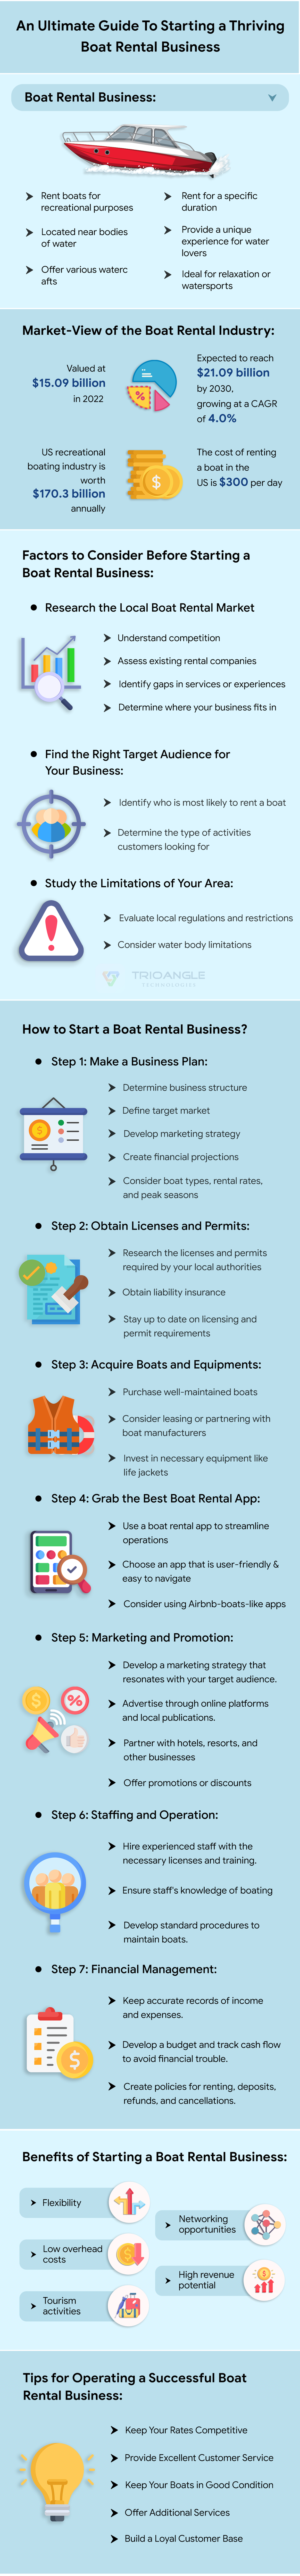 https://www.trioangle.com/blog/ultimate-guide-to-start-a-thriving-boat-rental-business/